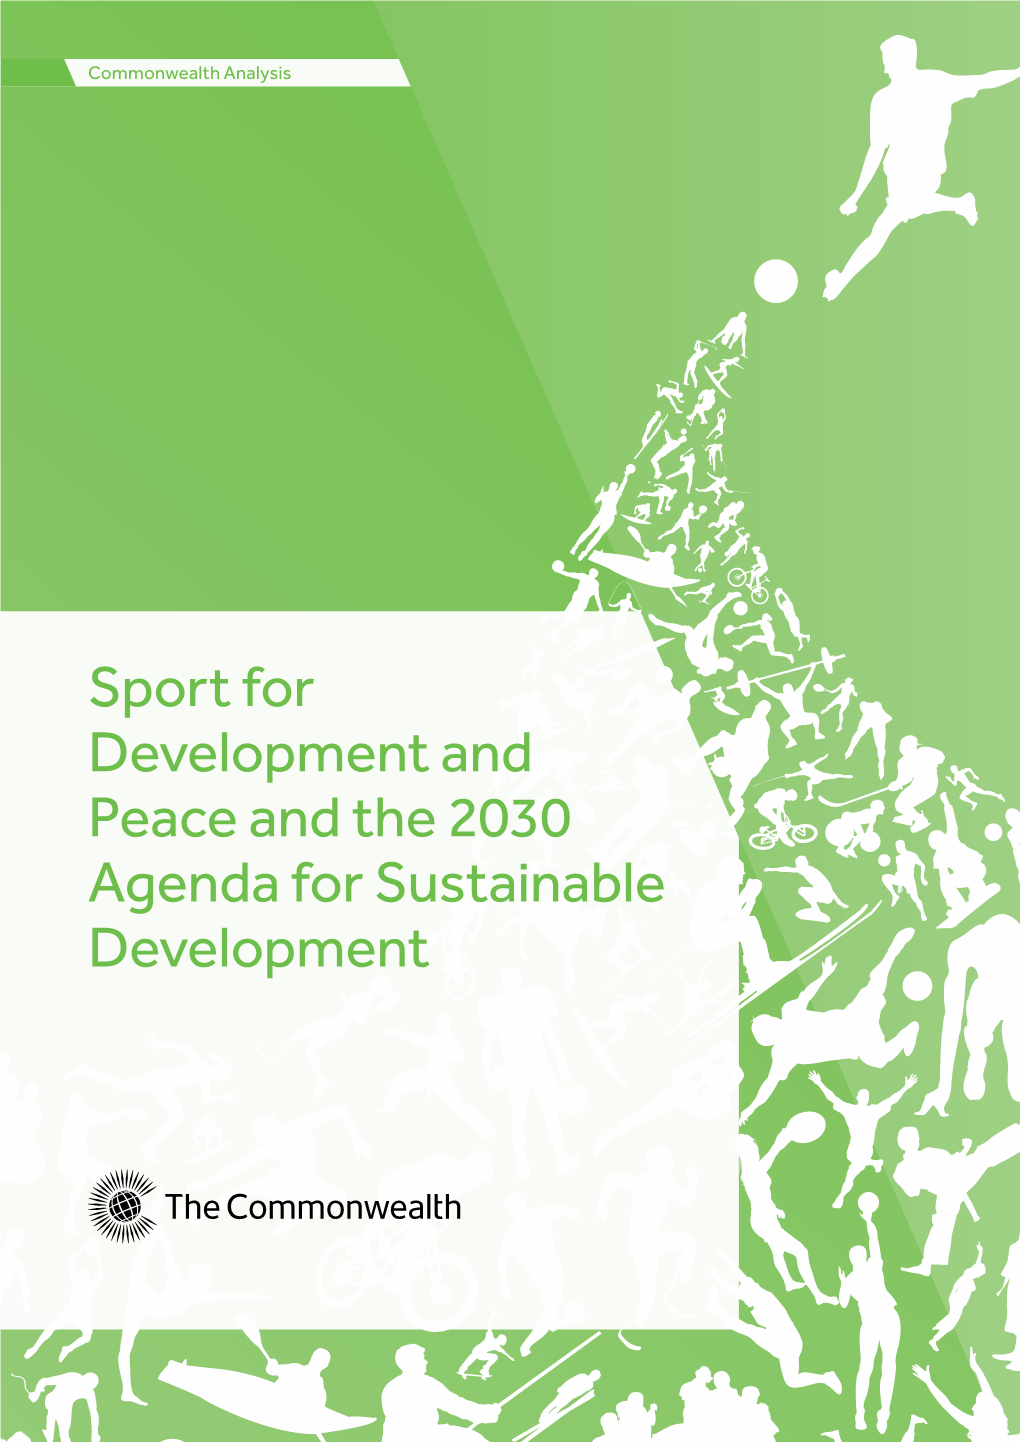 Sport for Development and Peace and the 2030 Agenda for Sustainable Development